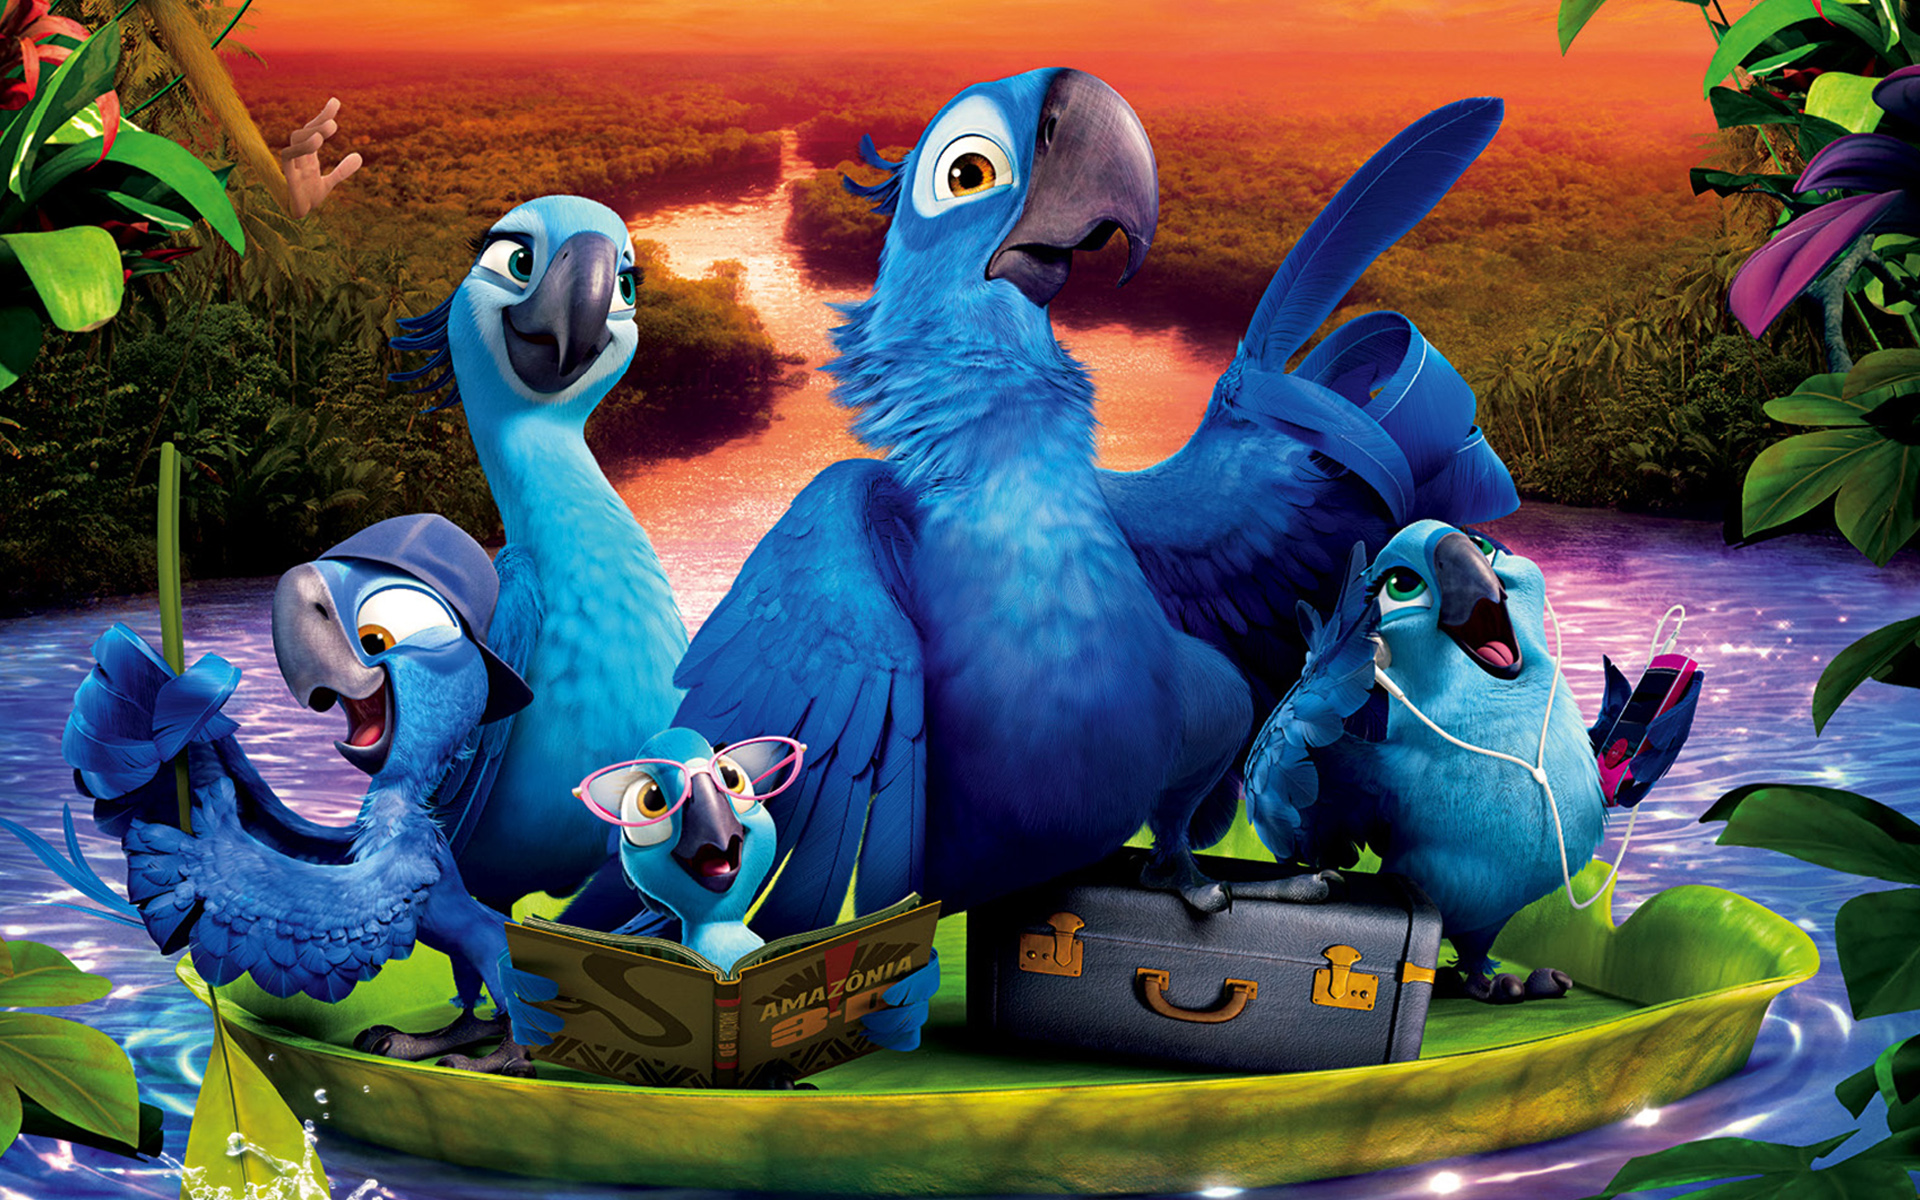 Amazing Rio 2 Pictures & Backgrounds